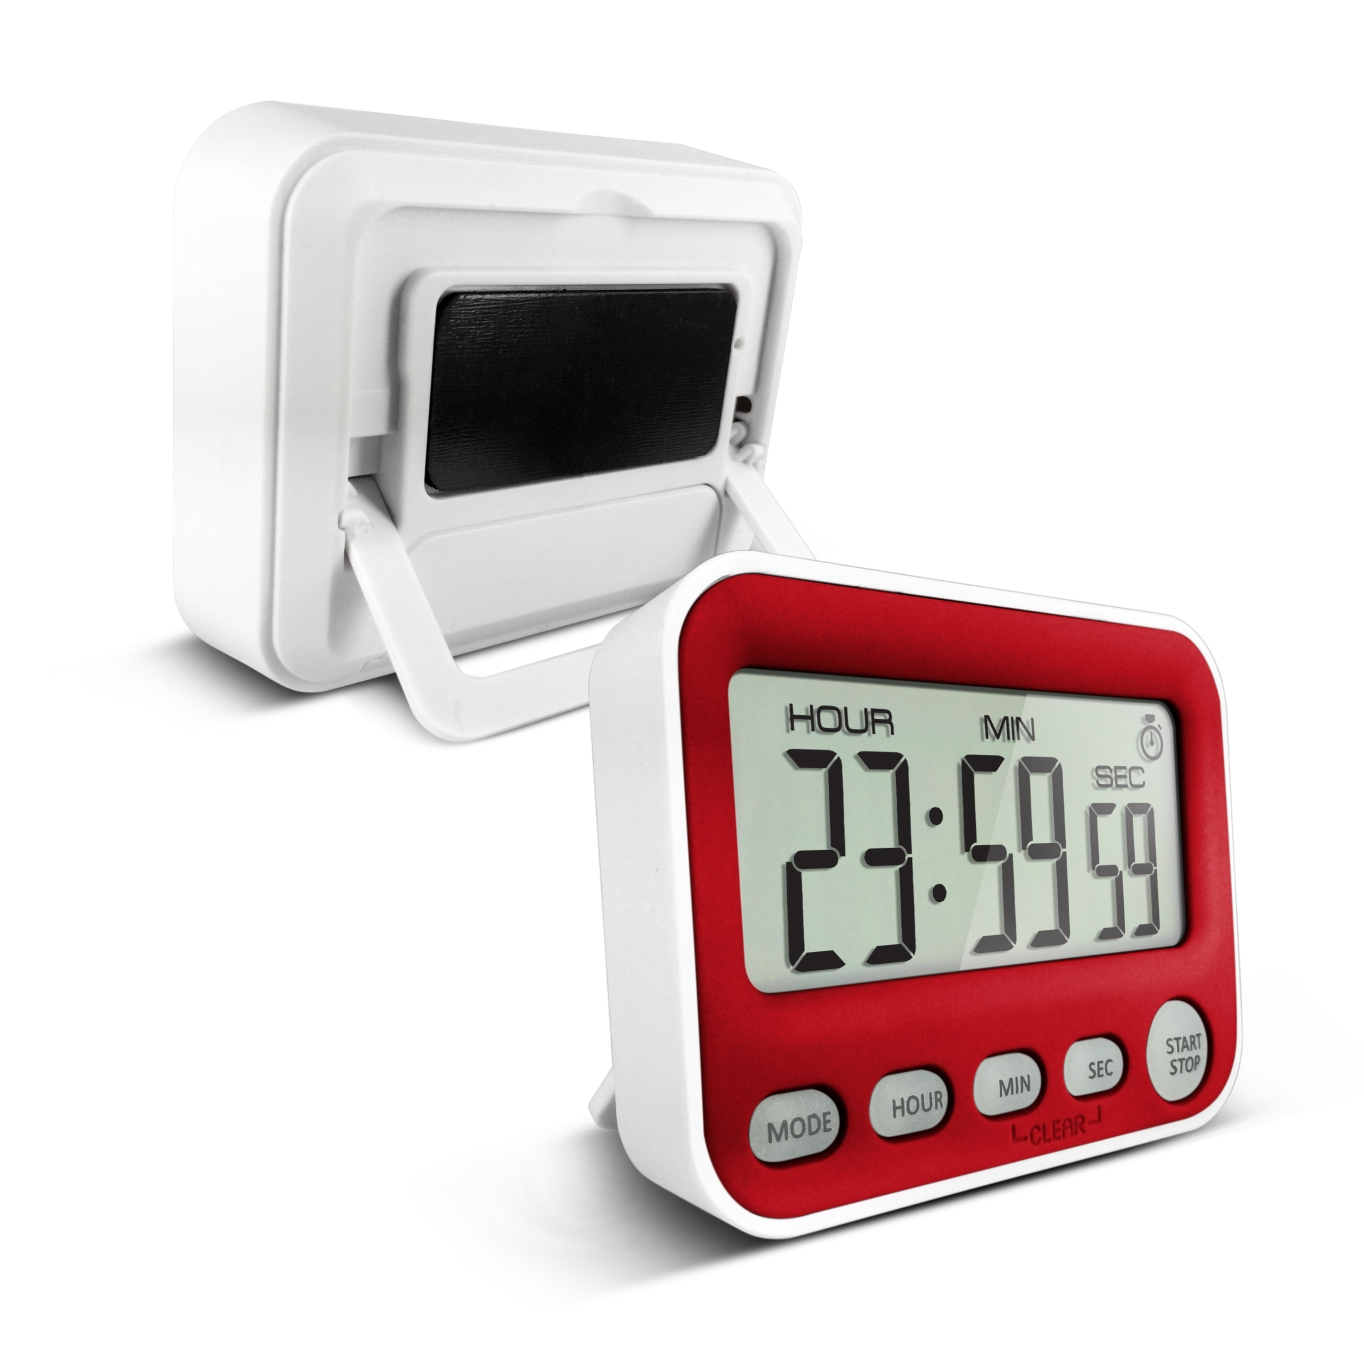 CR-321 Jumbo Display Timer with Clock - Click Image to Close